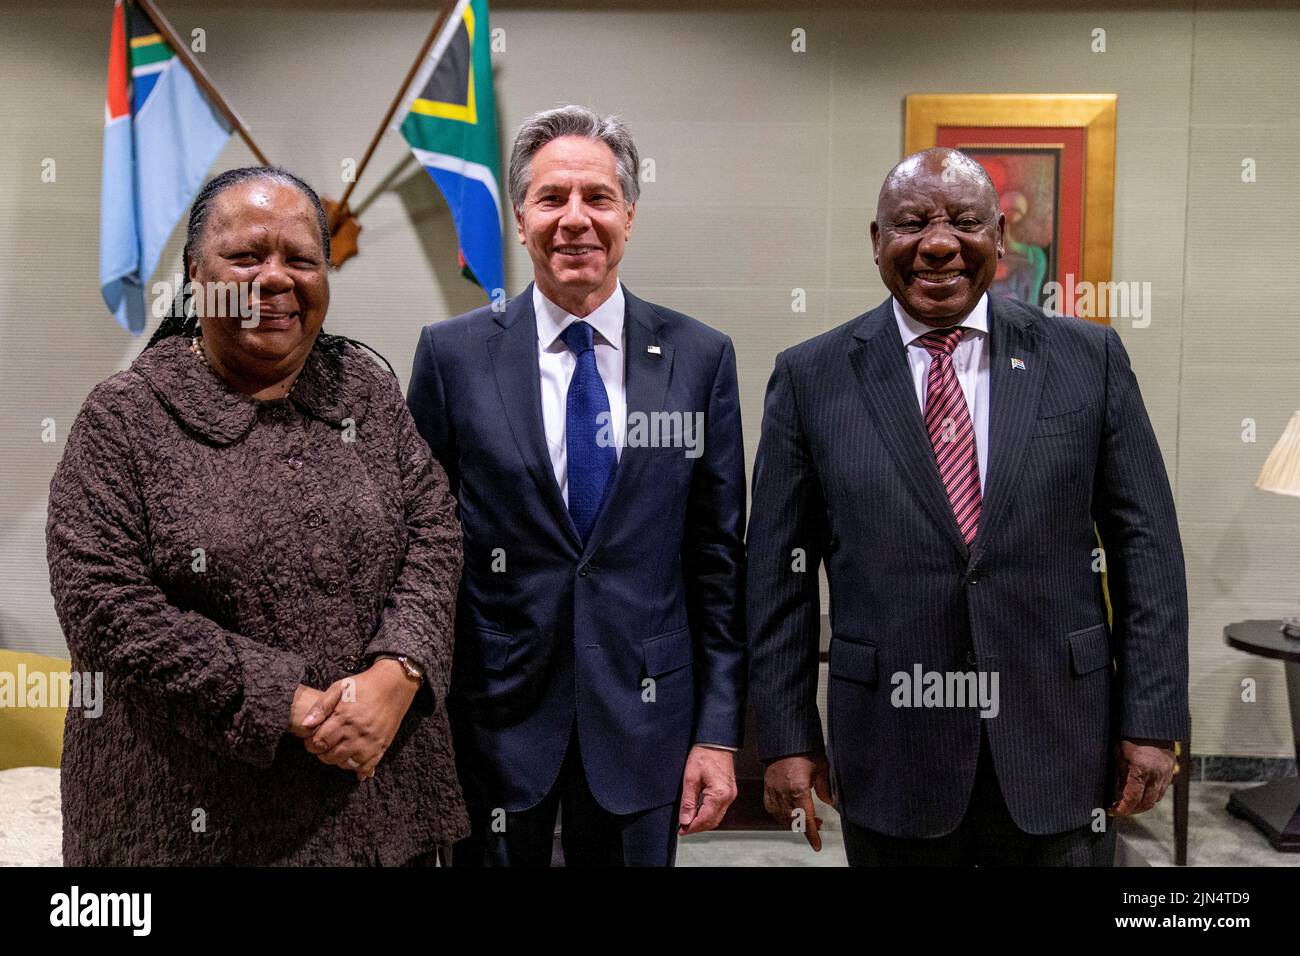 U.S. Secretary of State Antony Blinken, South Africa's President Cyril Ramaphosa and South Africa's Foreign Minister Naledi Pandor pose for a photo as they meet at Waterkloof Airforce Base in Centurion, South Africa, August 9, 2022. Andrew Harnik/Pool via REUTERS Stock Photo